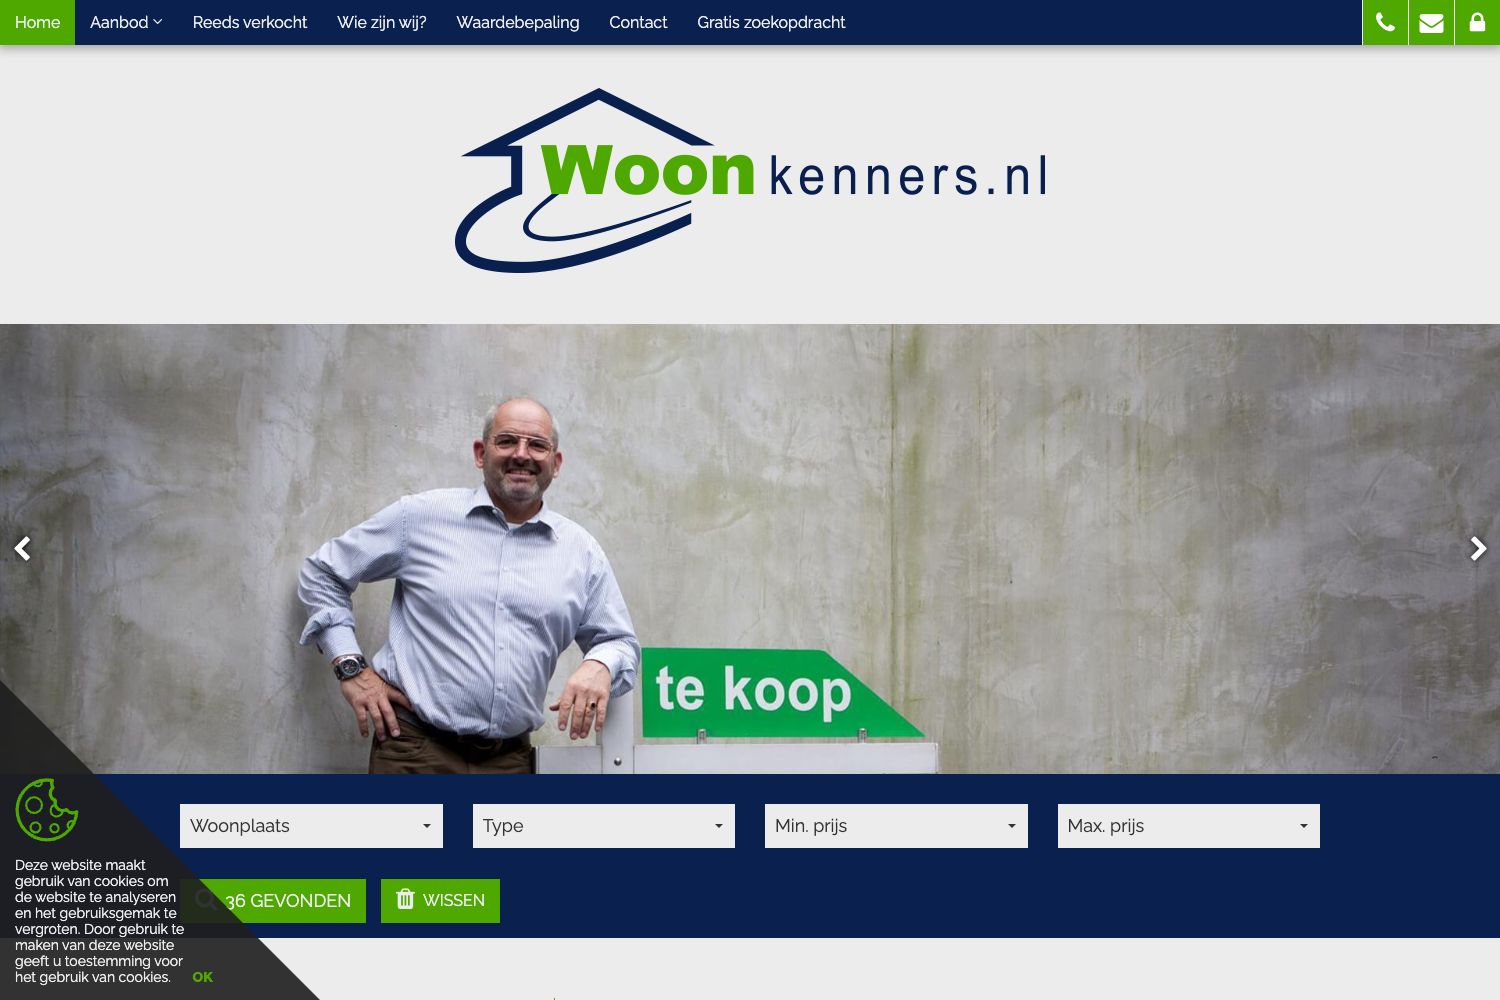 Foto Woonkenners.nl